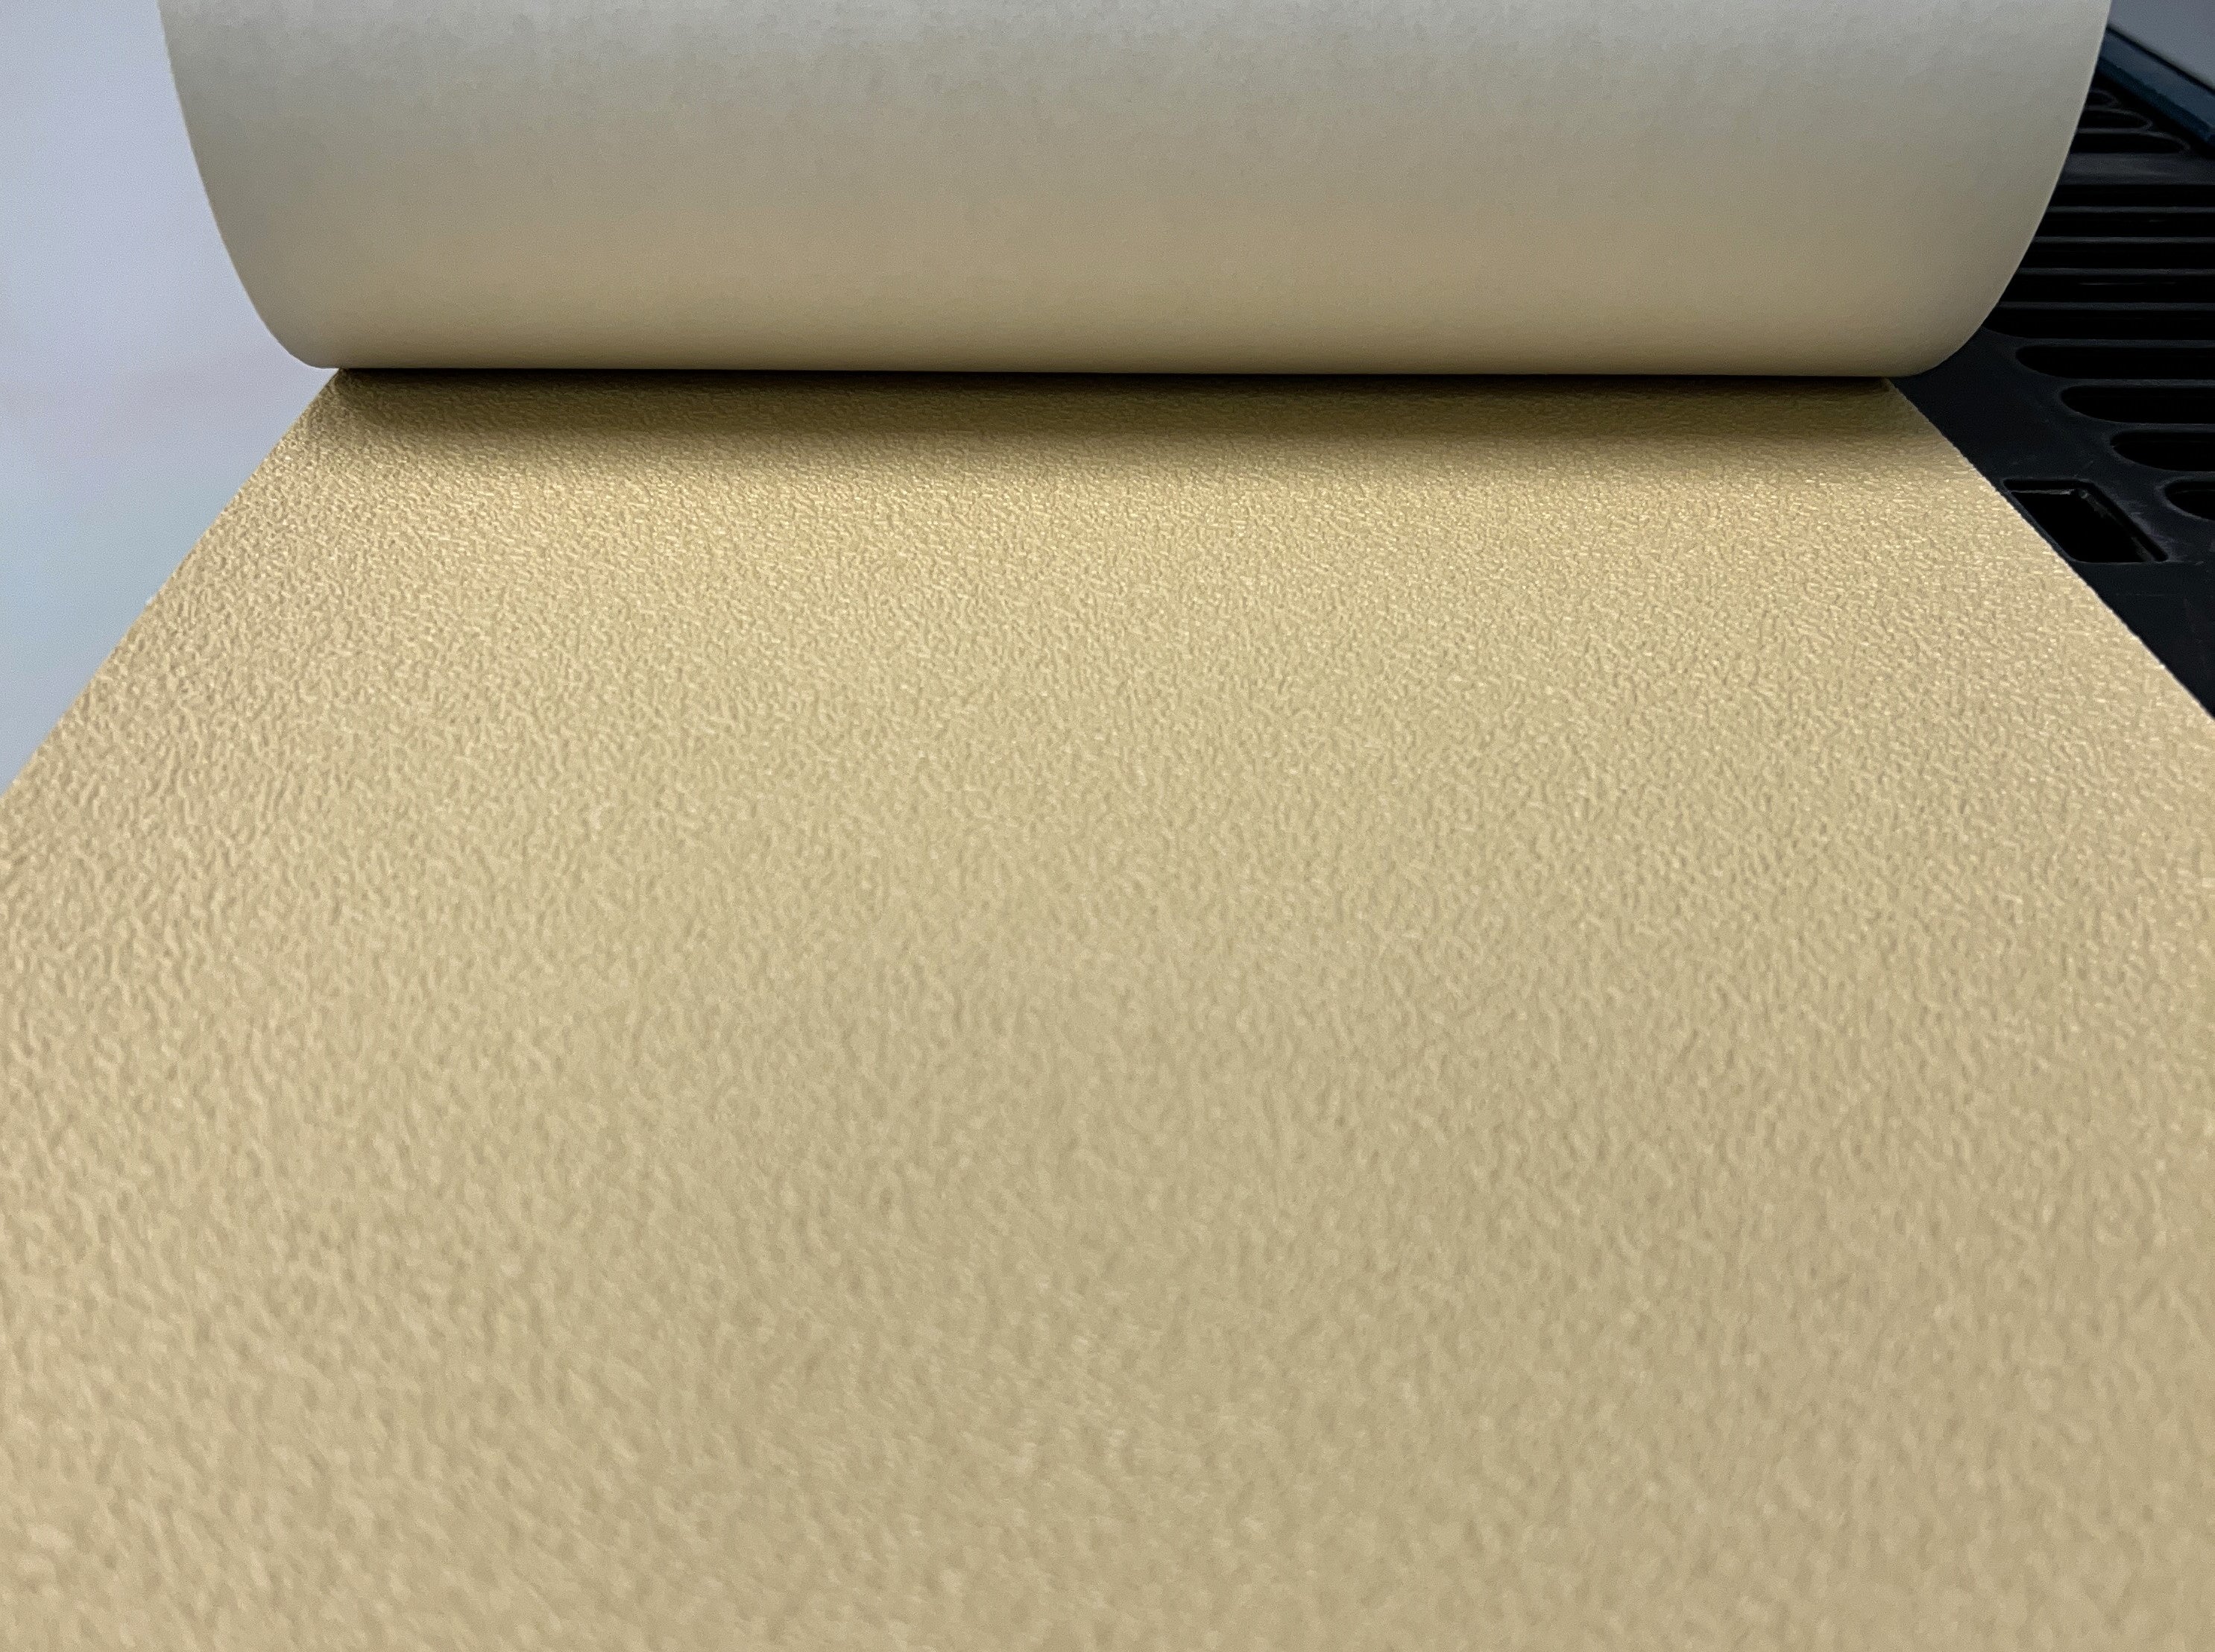 TAN Resilient Textured Rubberized (NO GRIT) Non-Slip Tape - 12" X 10' Foot Roll - Limited Stock